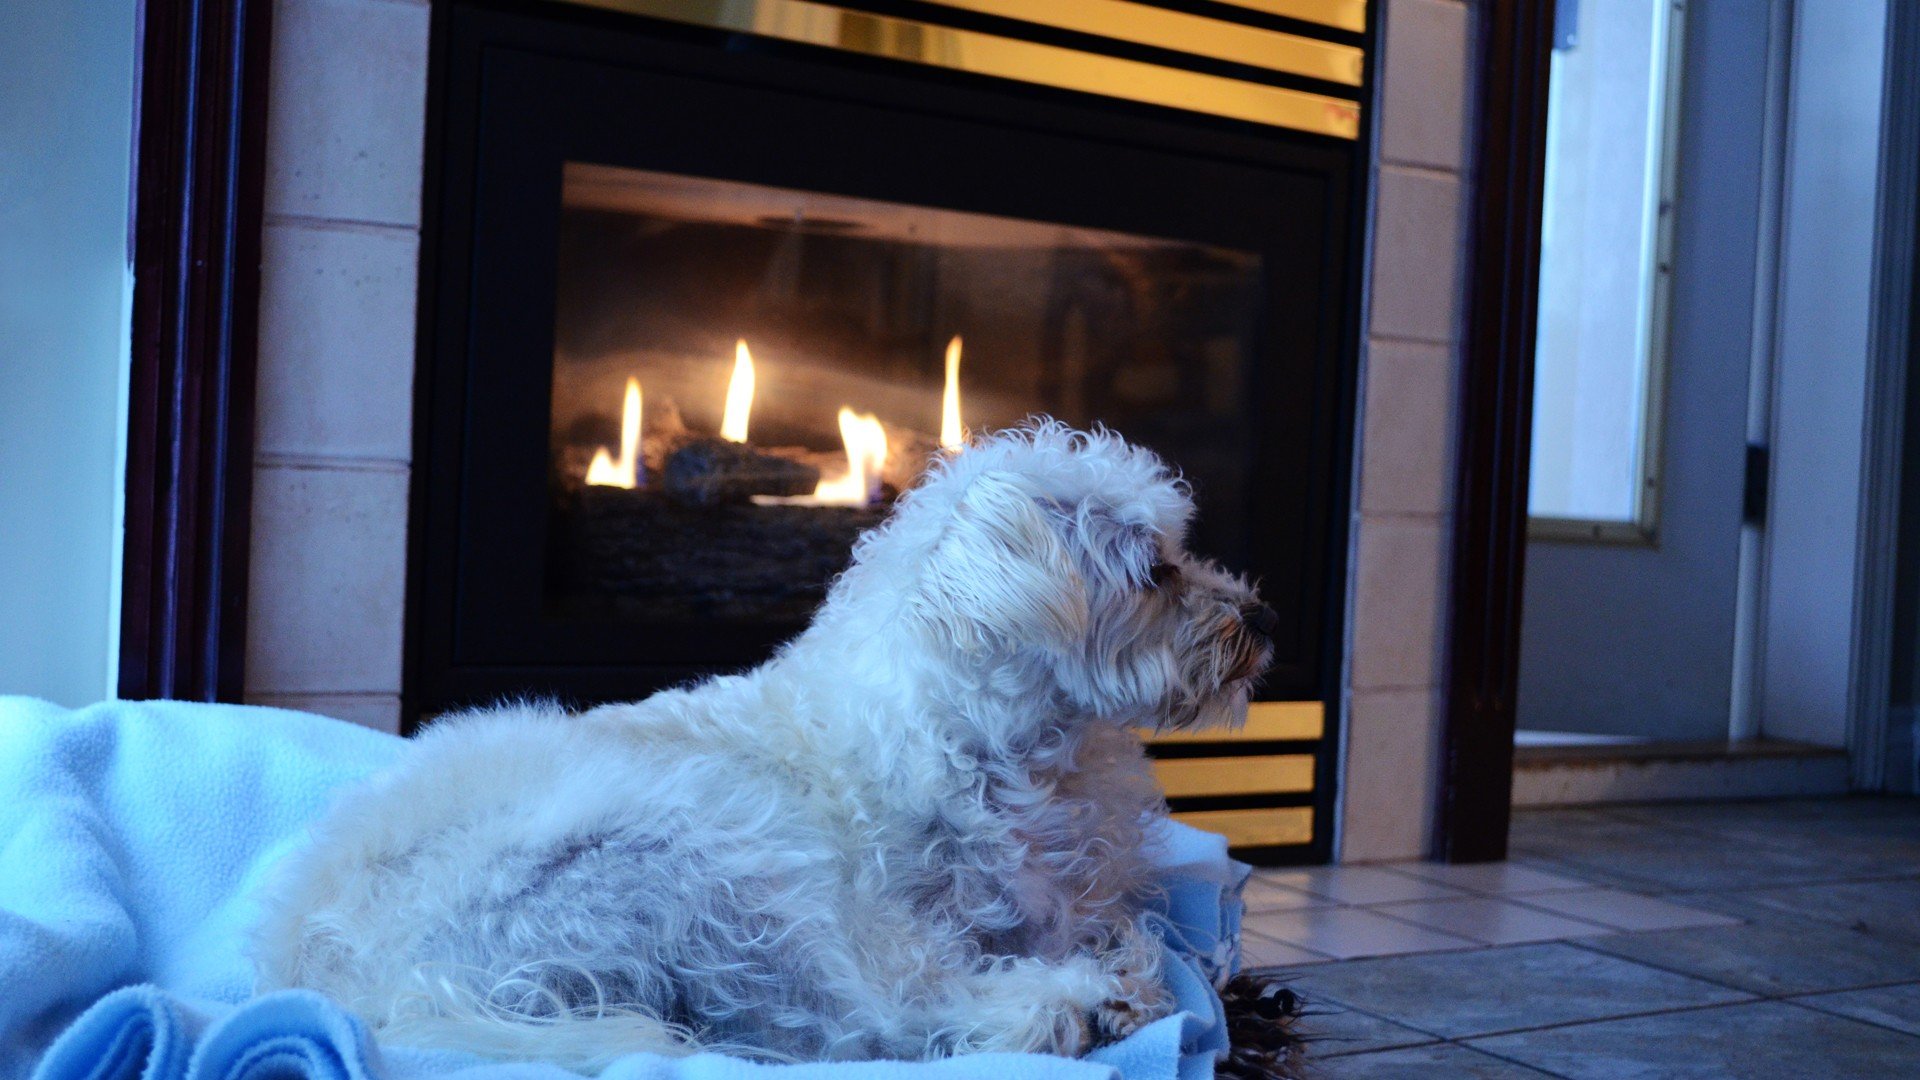 beds, Dogs, Homes, Fireplaces Wallpaper